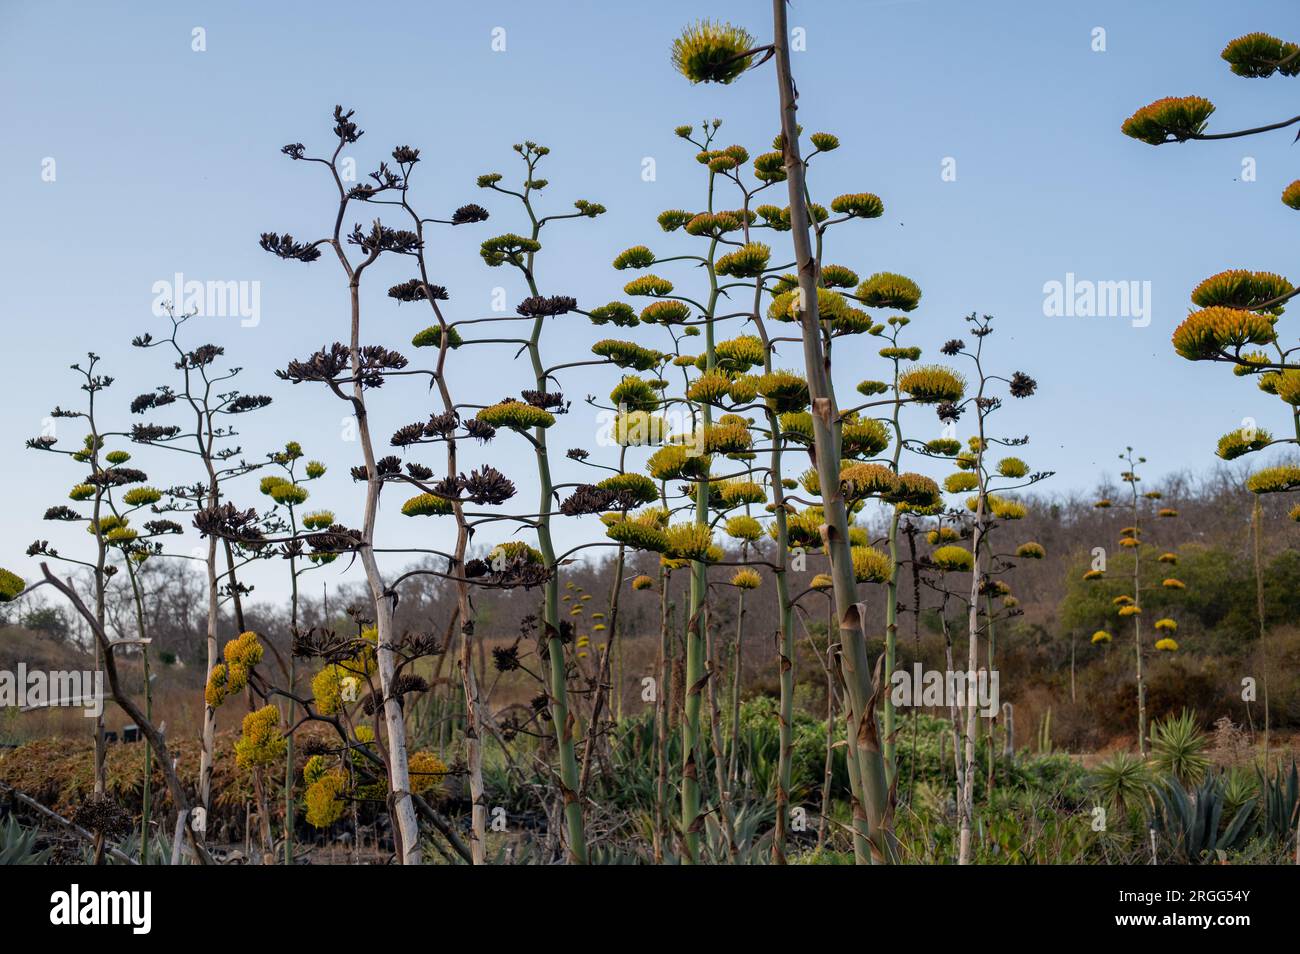 Group of agave plants Stock Photo